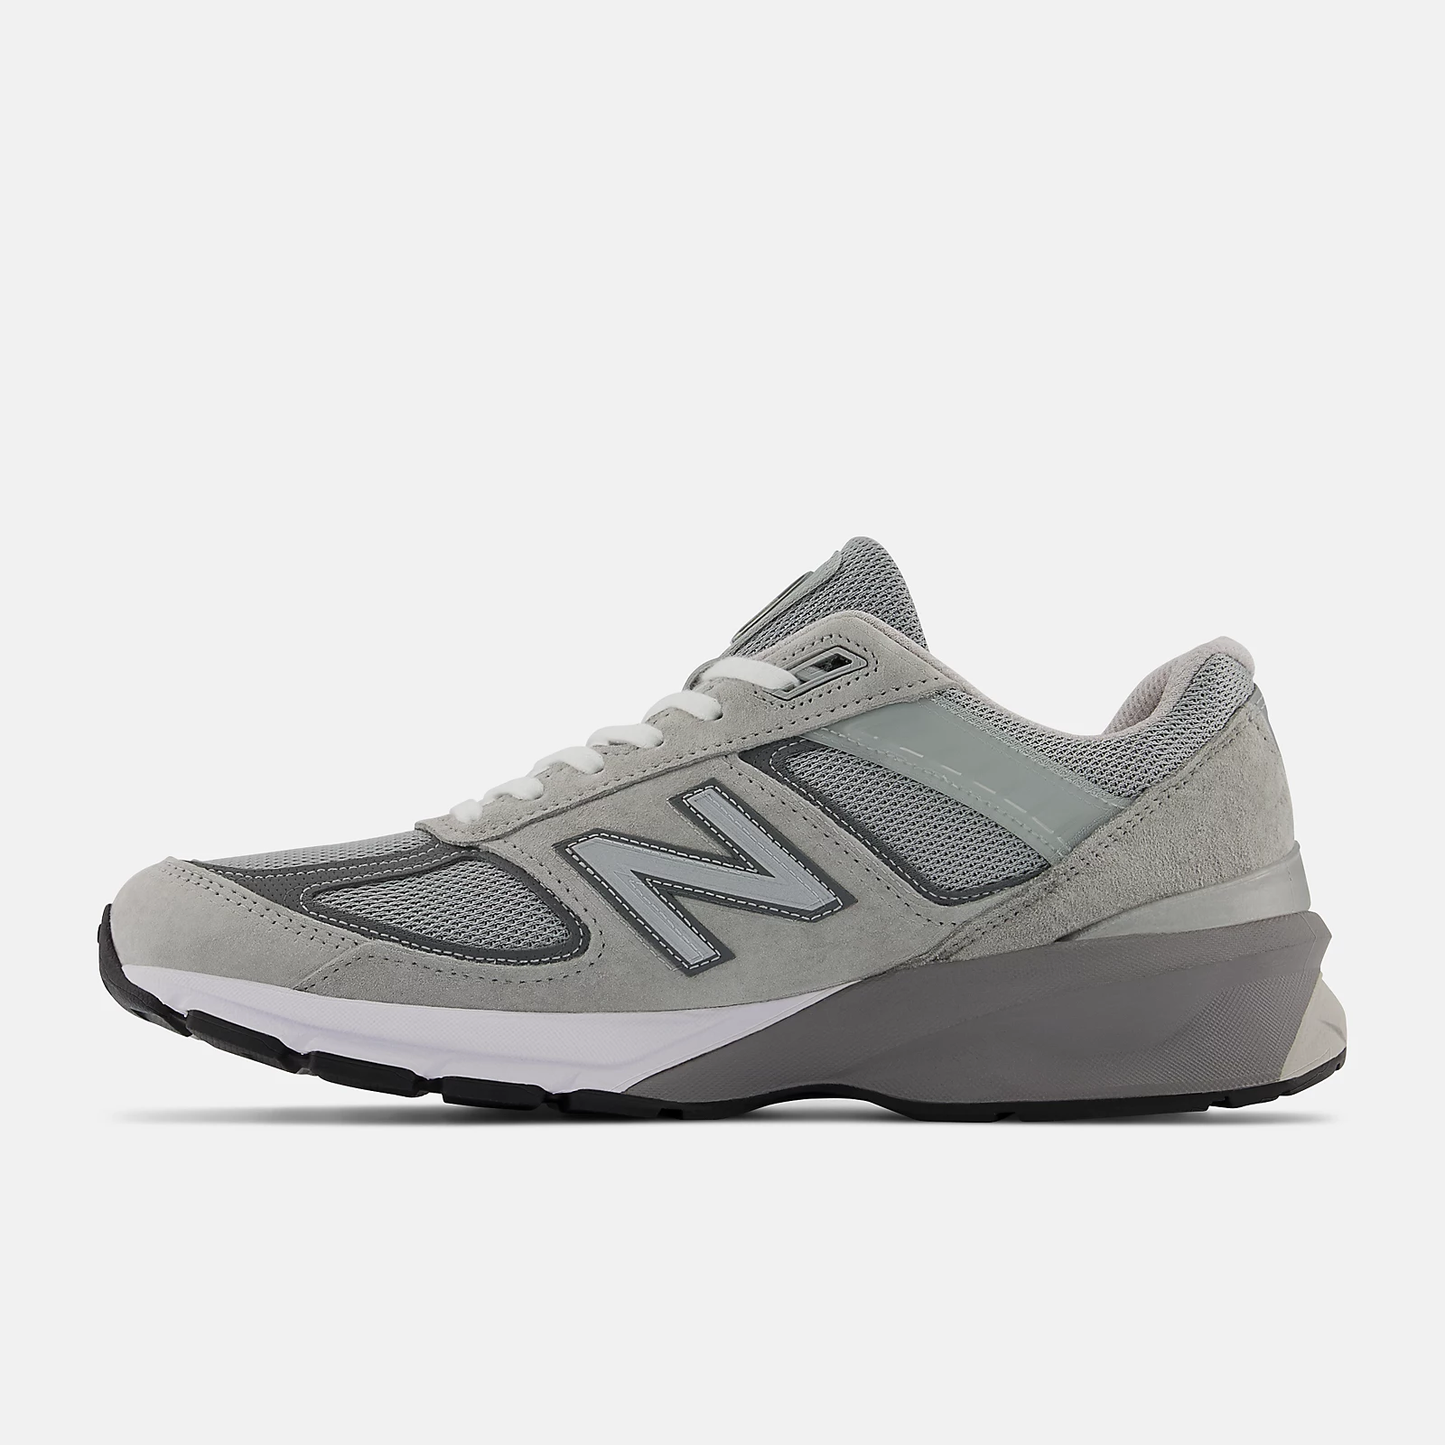 NEW BALANCE - MADE in USA 990v5 CORE